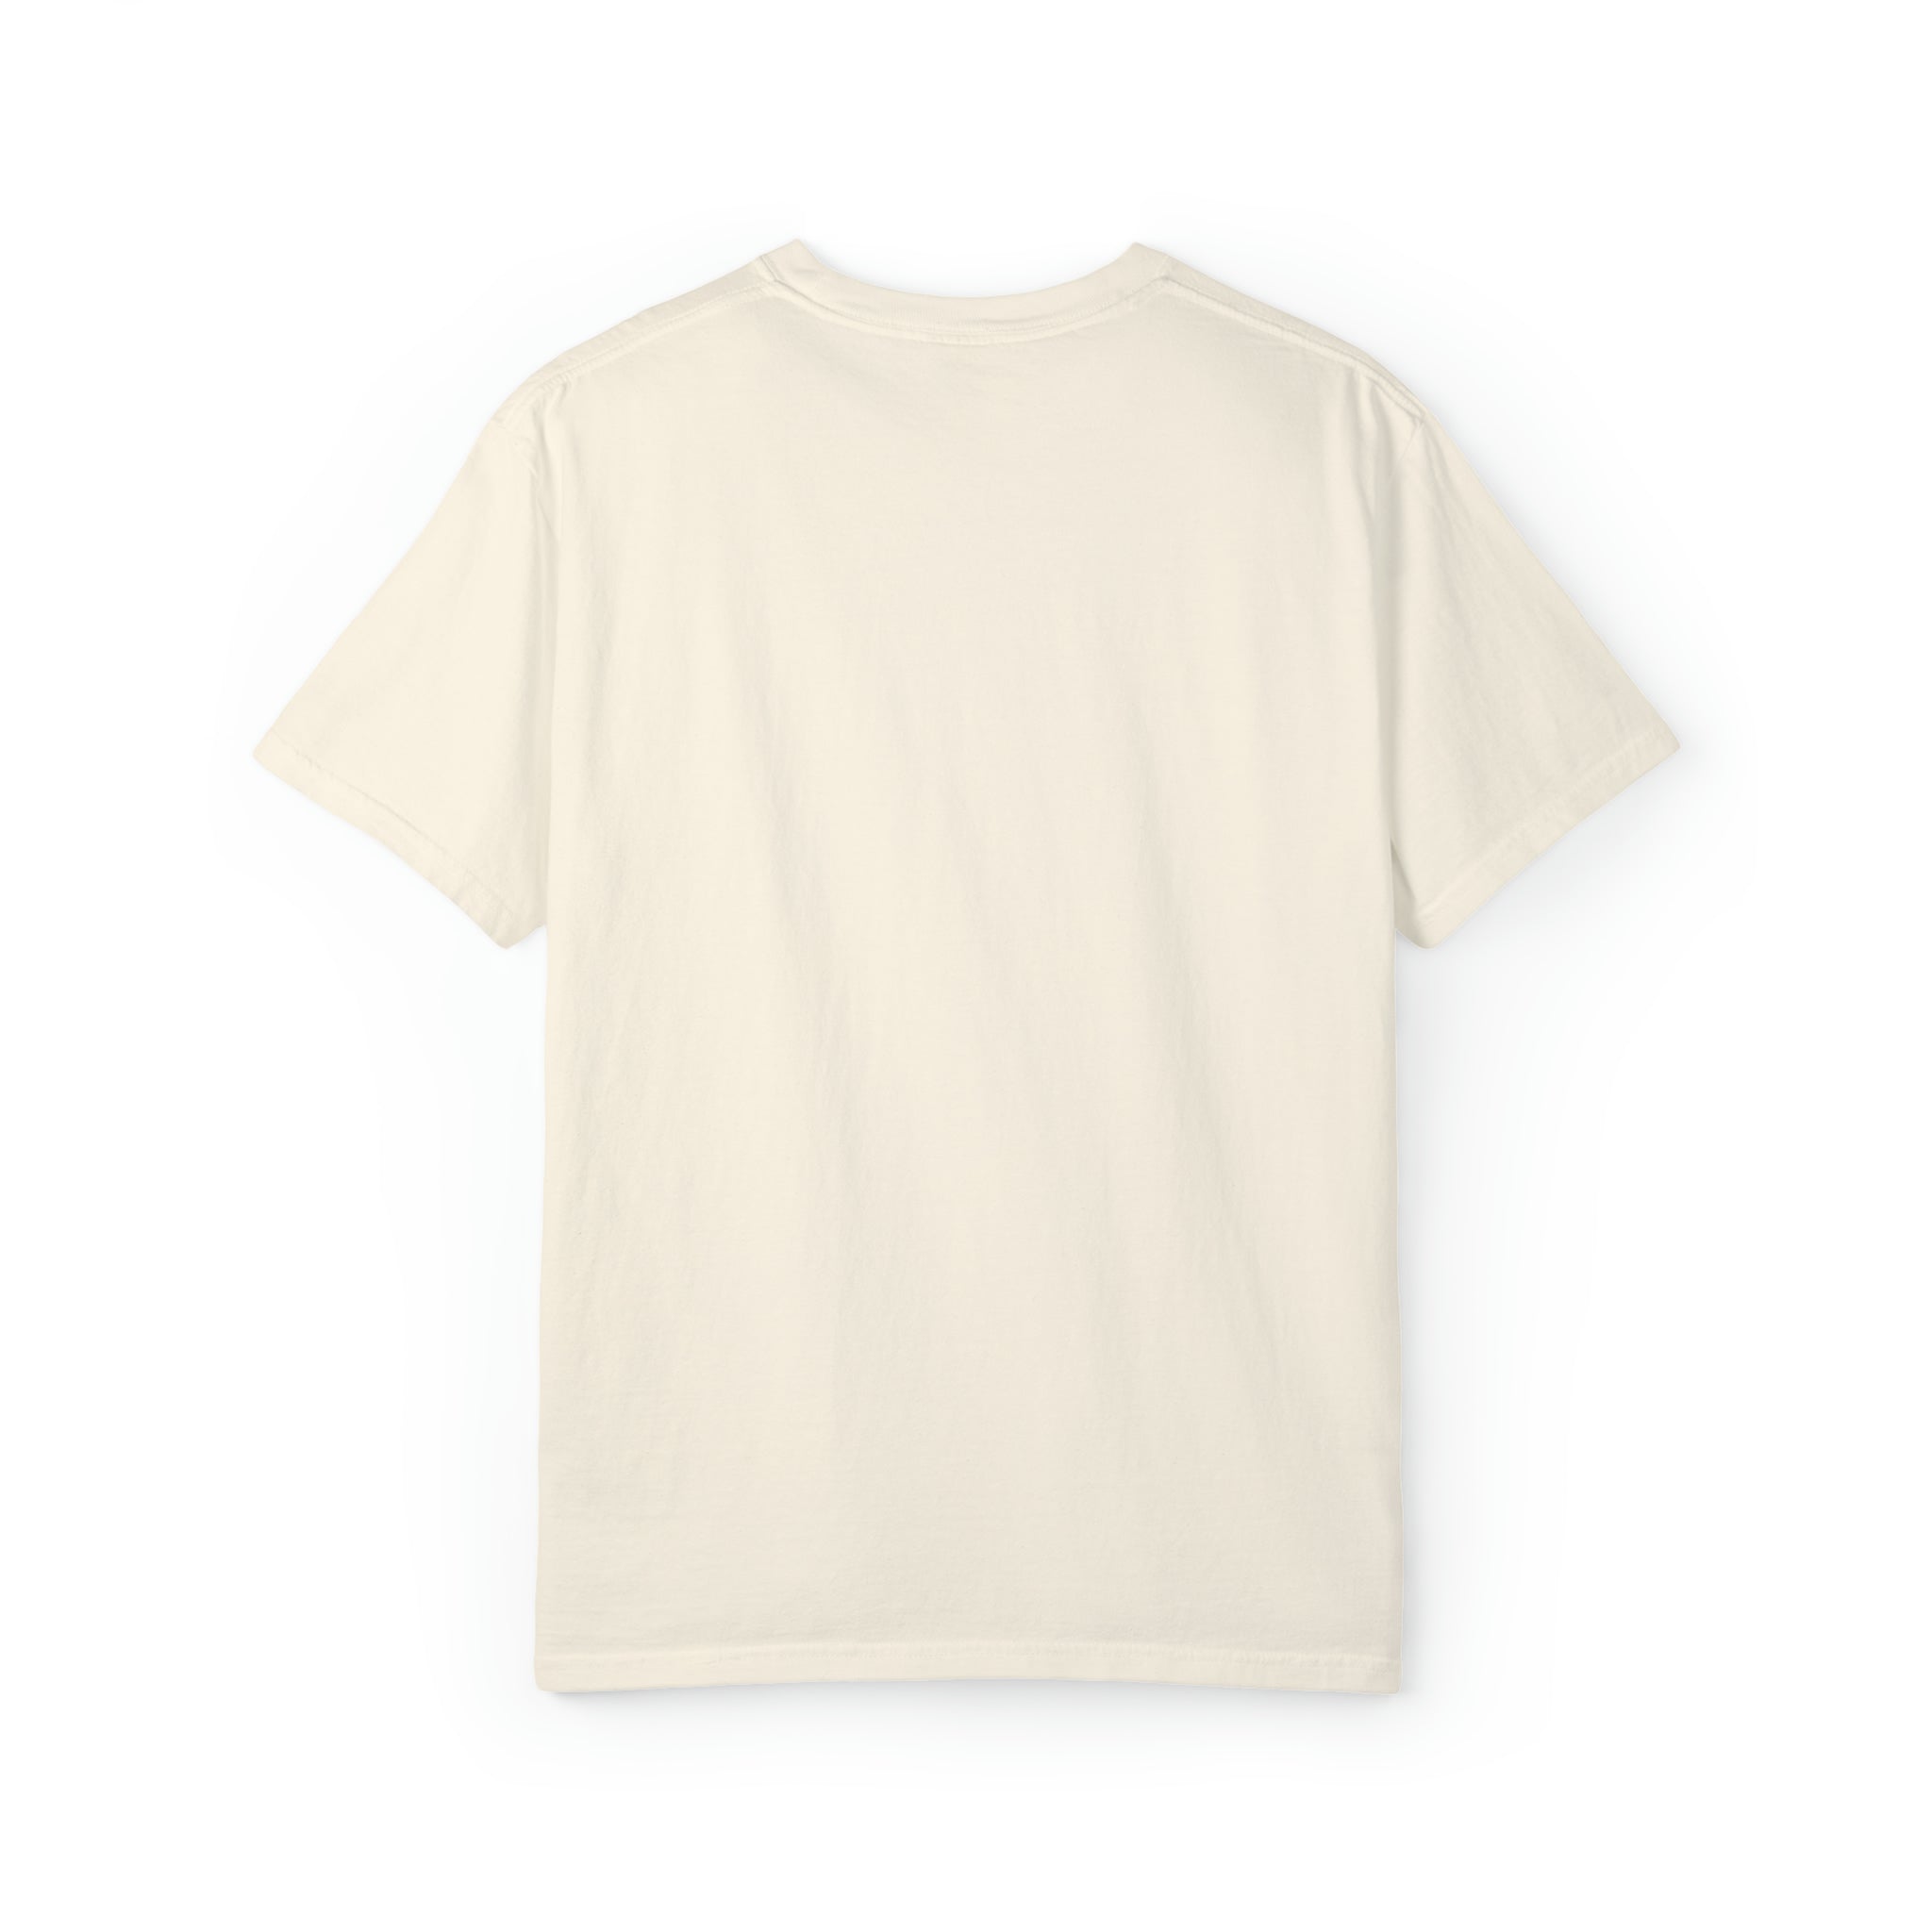 Town Pizza Collegiate Tee in Ivory